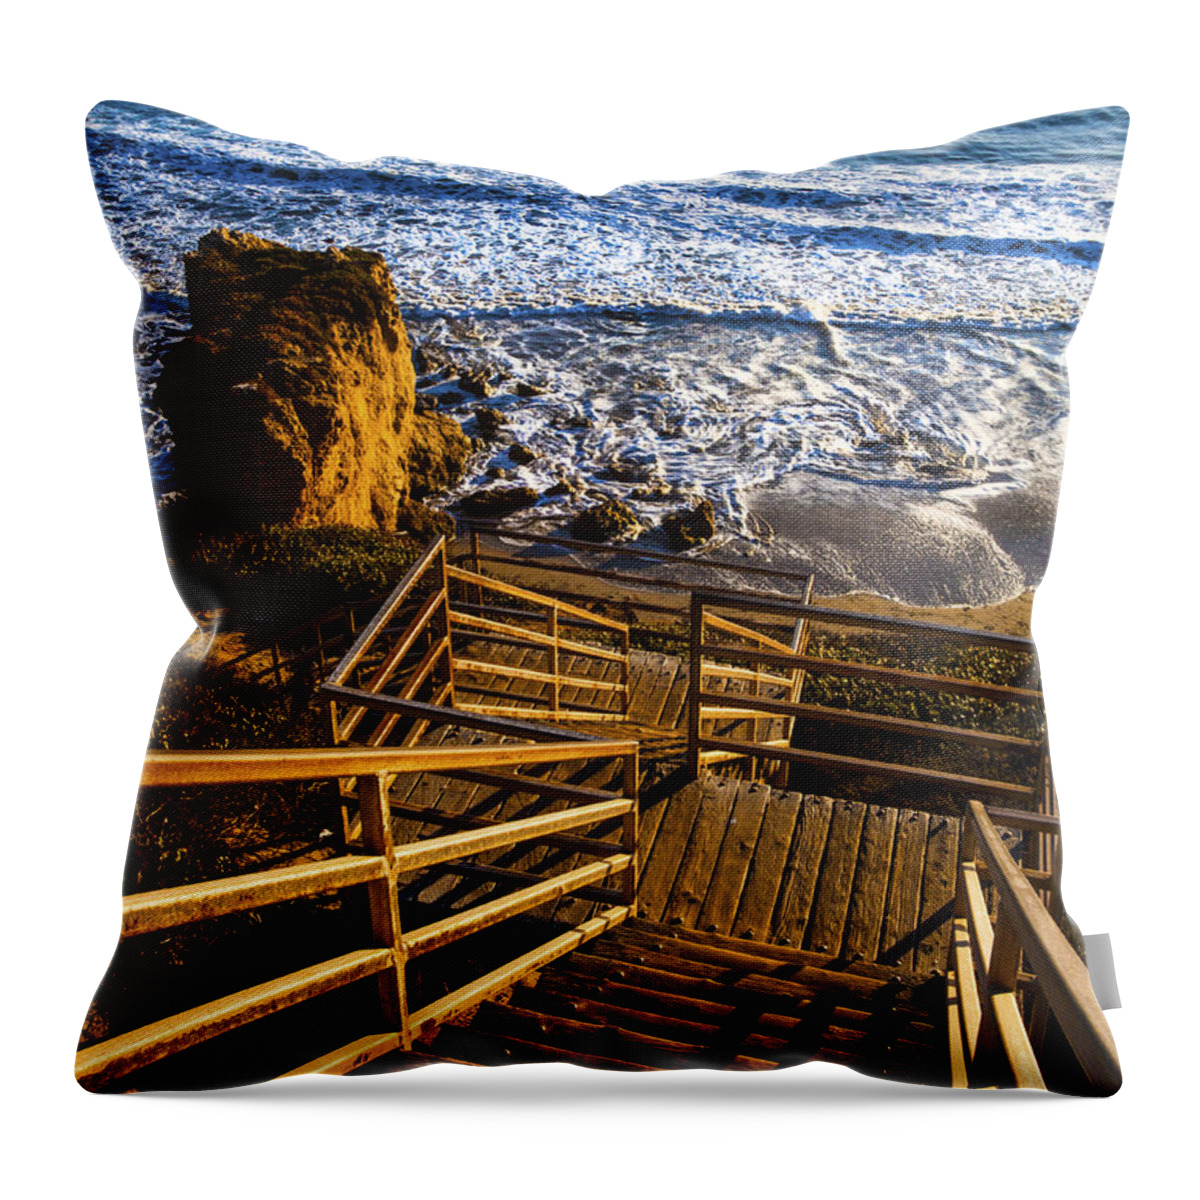 Steps To Blue Ocean Waves Photography Throw Pillow featuring the photograph Steps To Blue Ocean And Rocky Beach by Jerry Cowart